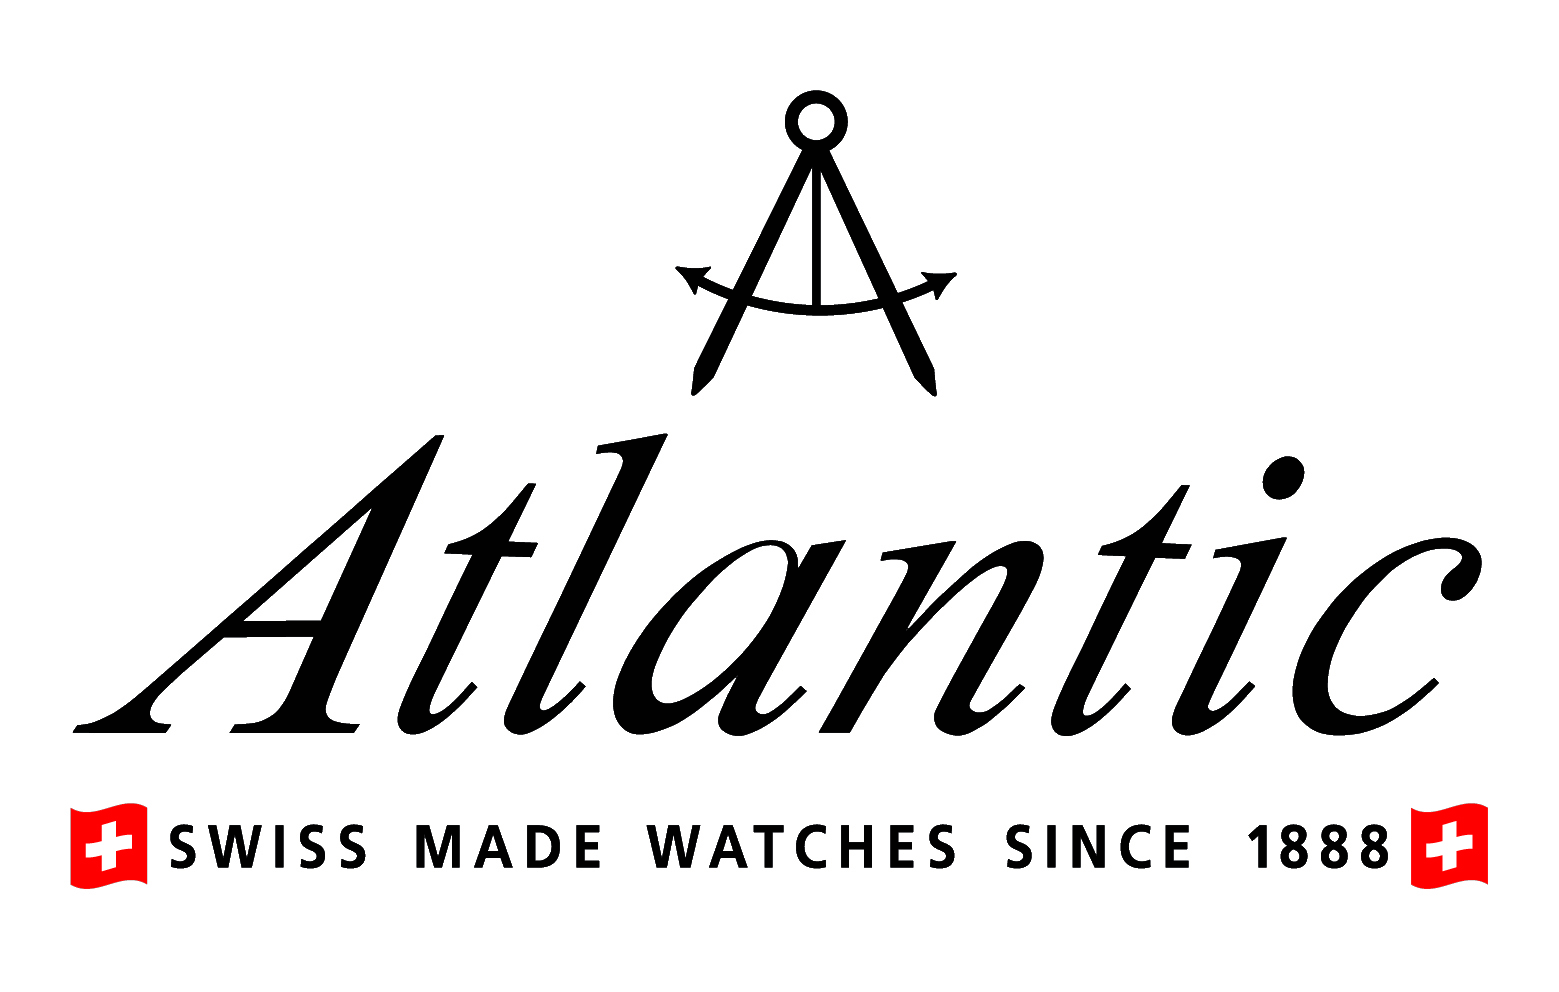 Atlantic Watches since 1888